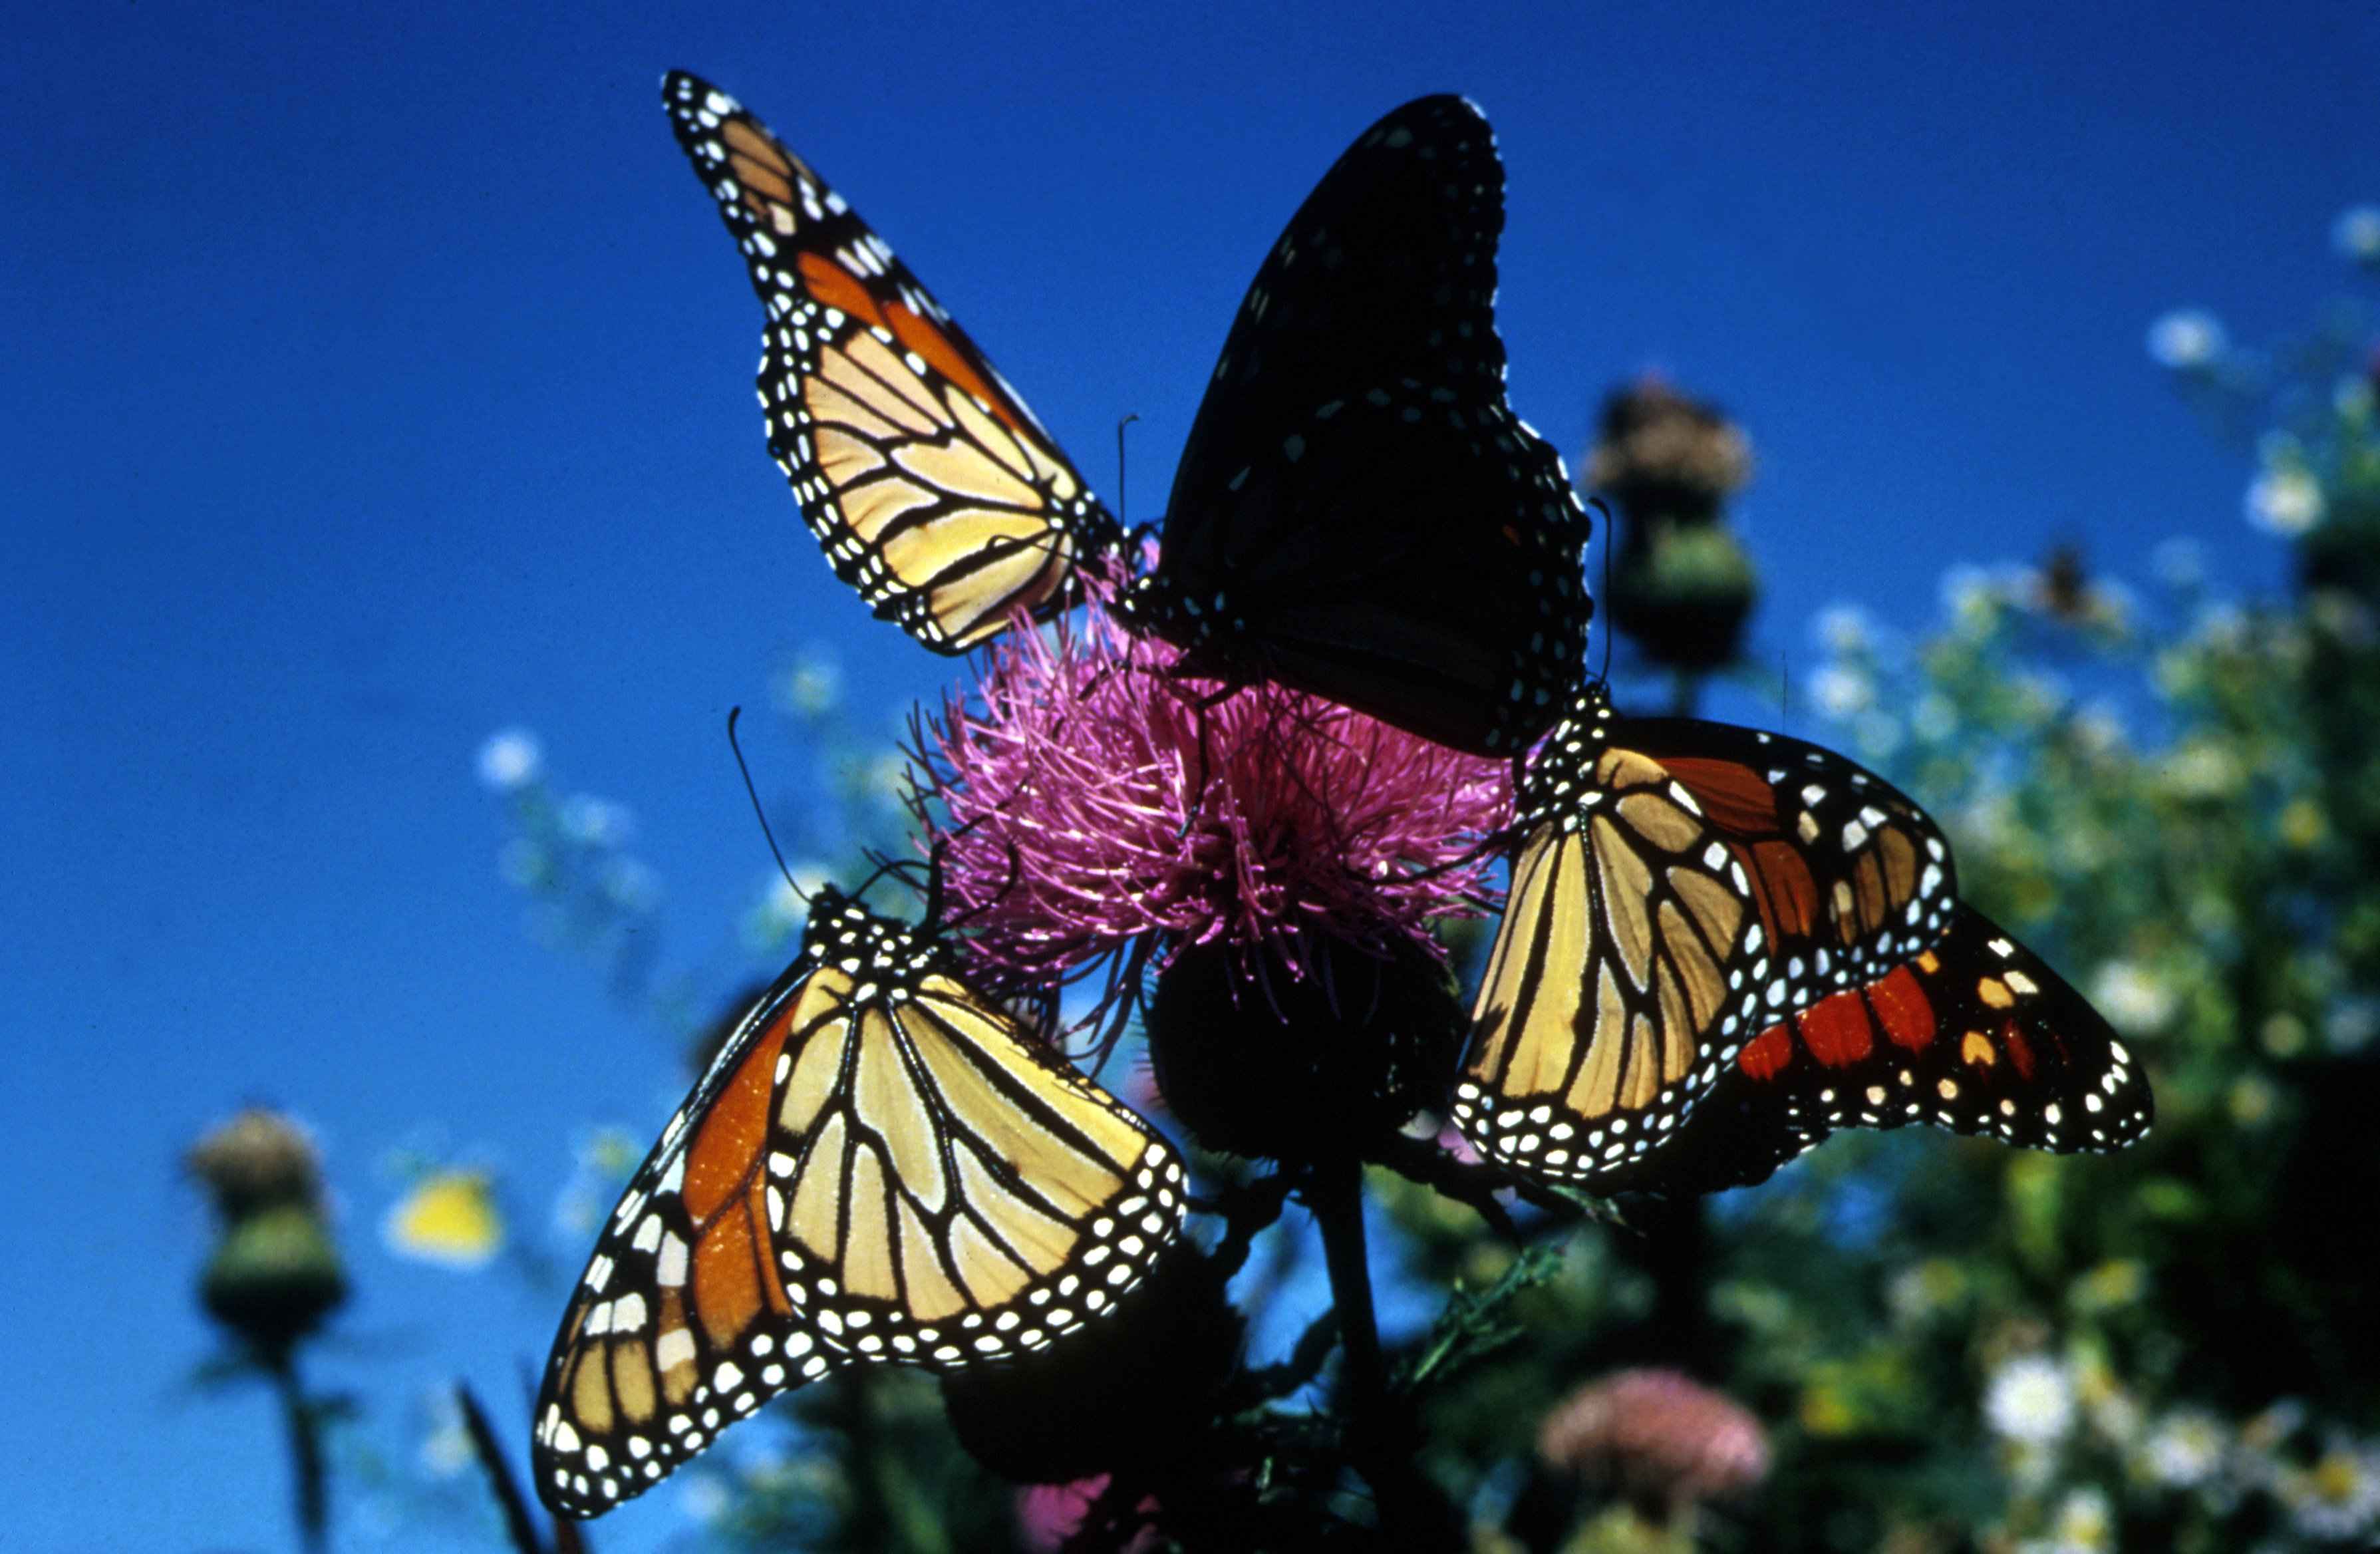 File:Monarch butterflies insects.jpg